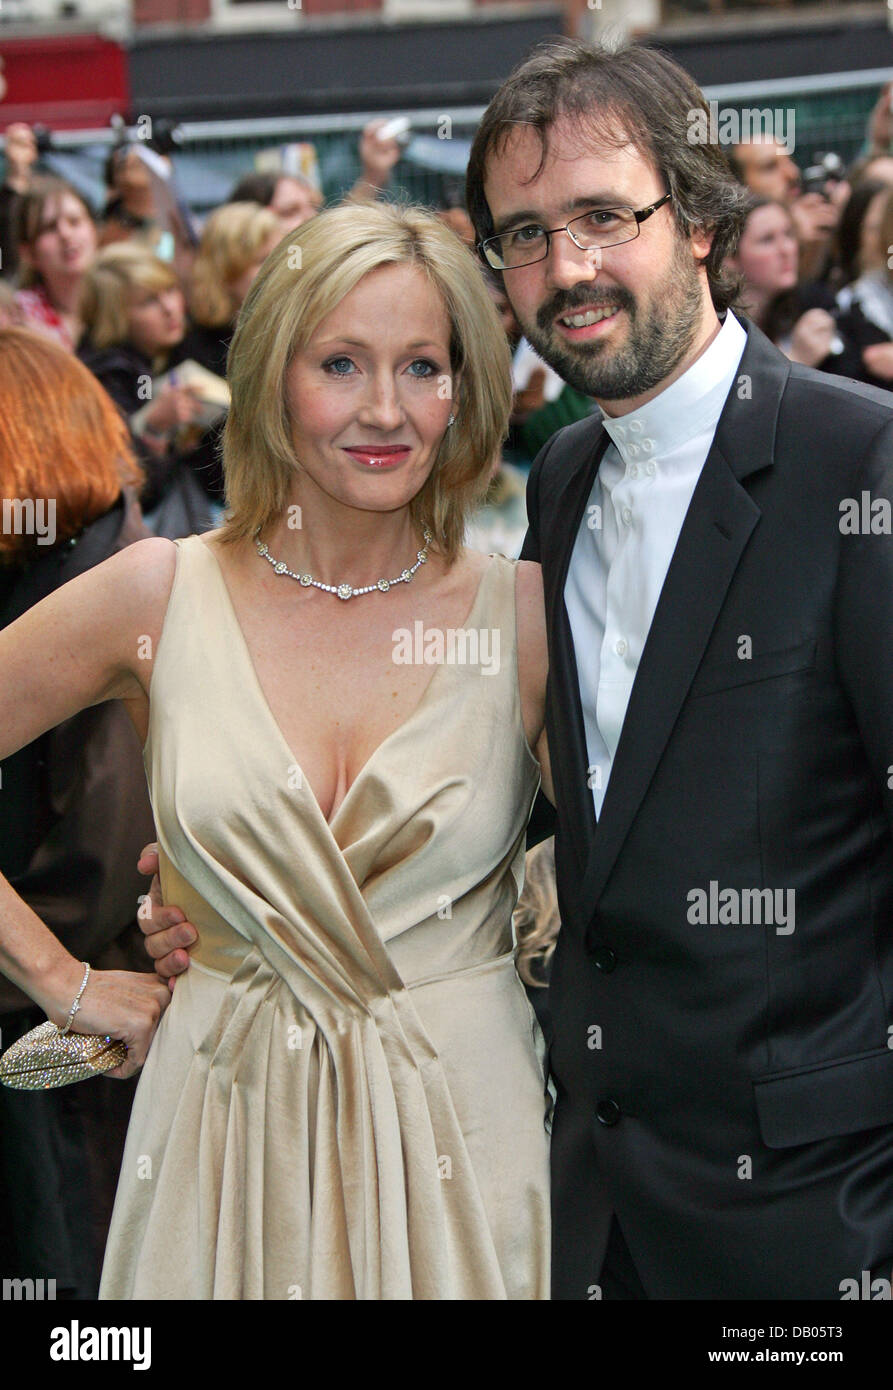 British author Joanne K. Rowling (L) and her husband Neil Murray arrive for the UK premiere of 'Harry Potter and the Order of the Phoenix' at Leicester Square in London, United Kingdom, 03 July 2007. The film based on Rowling's popular book sequel will be in cinemas on July 12th. Photo: Hubert Boesl Stock Photo